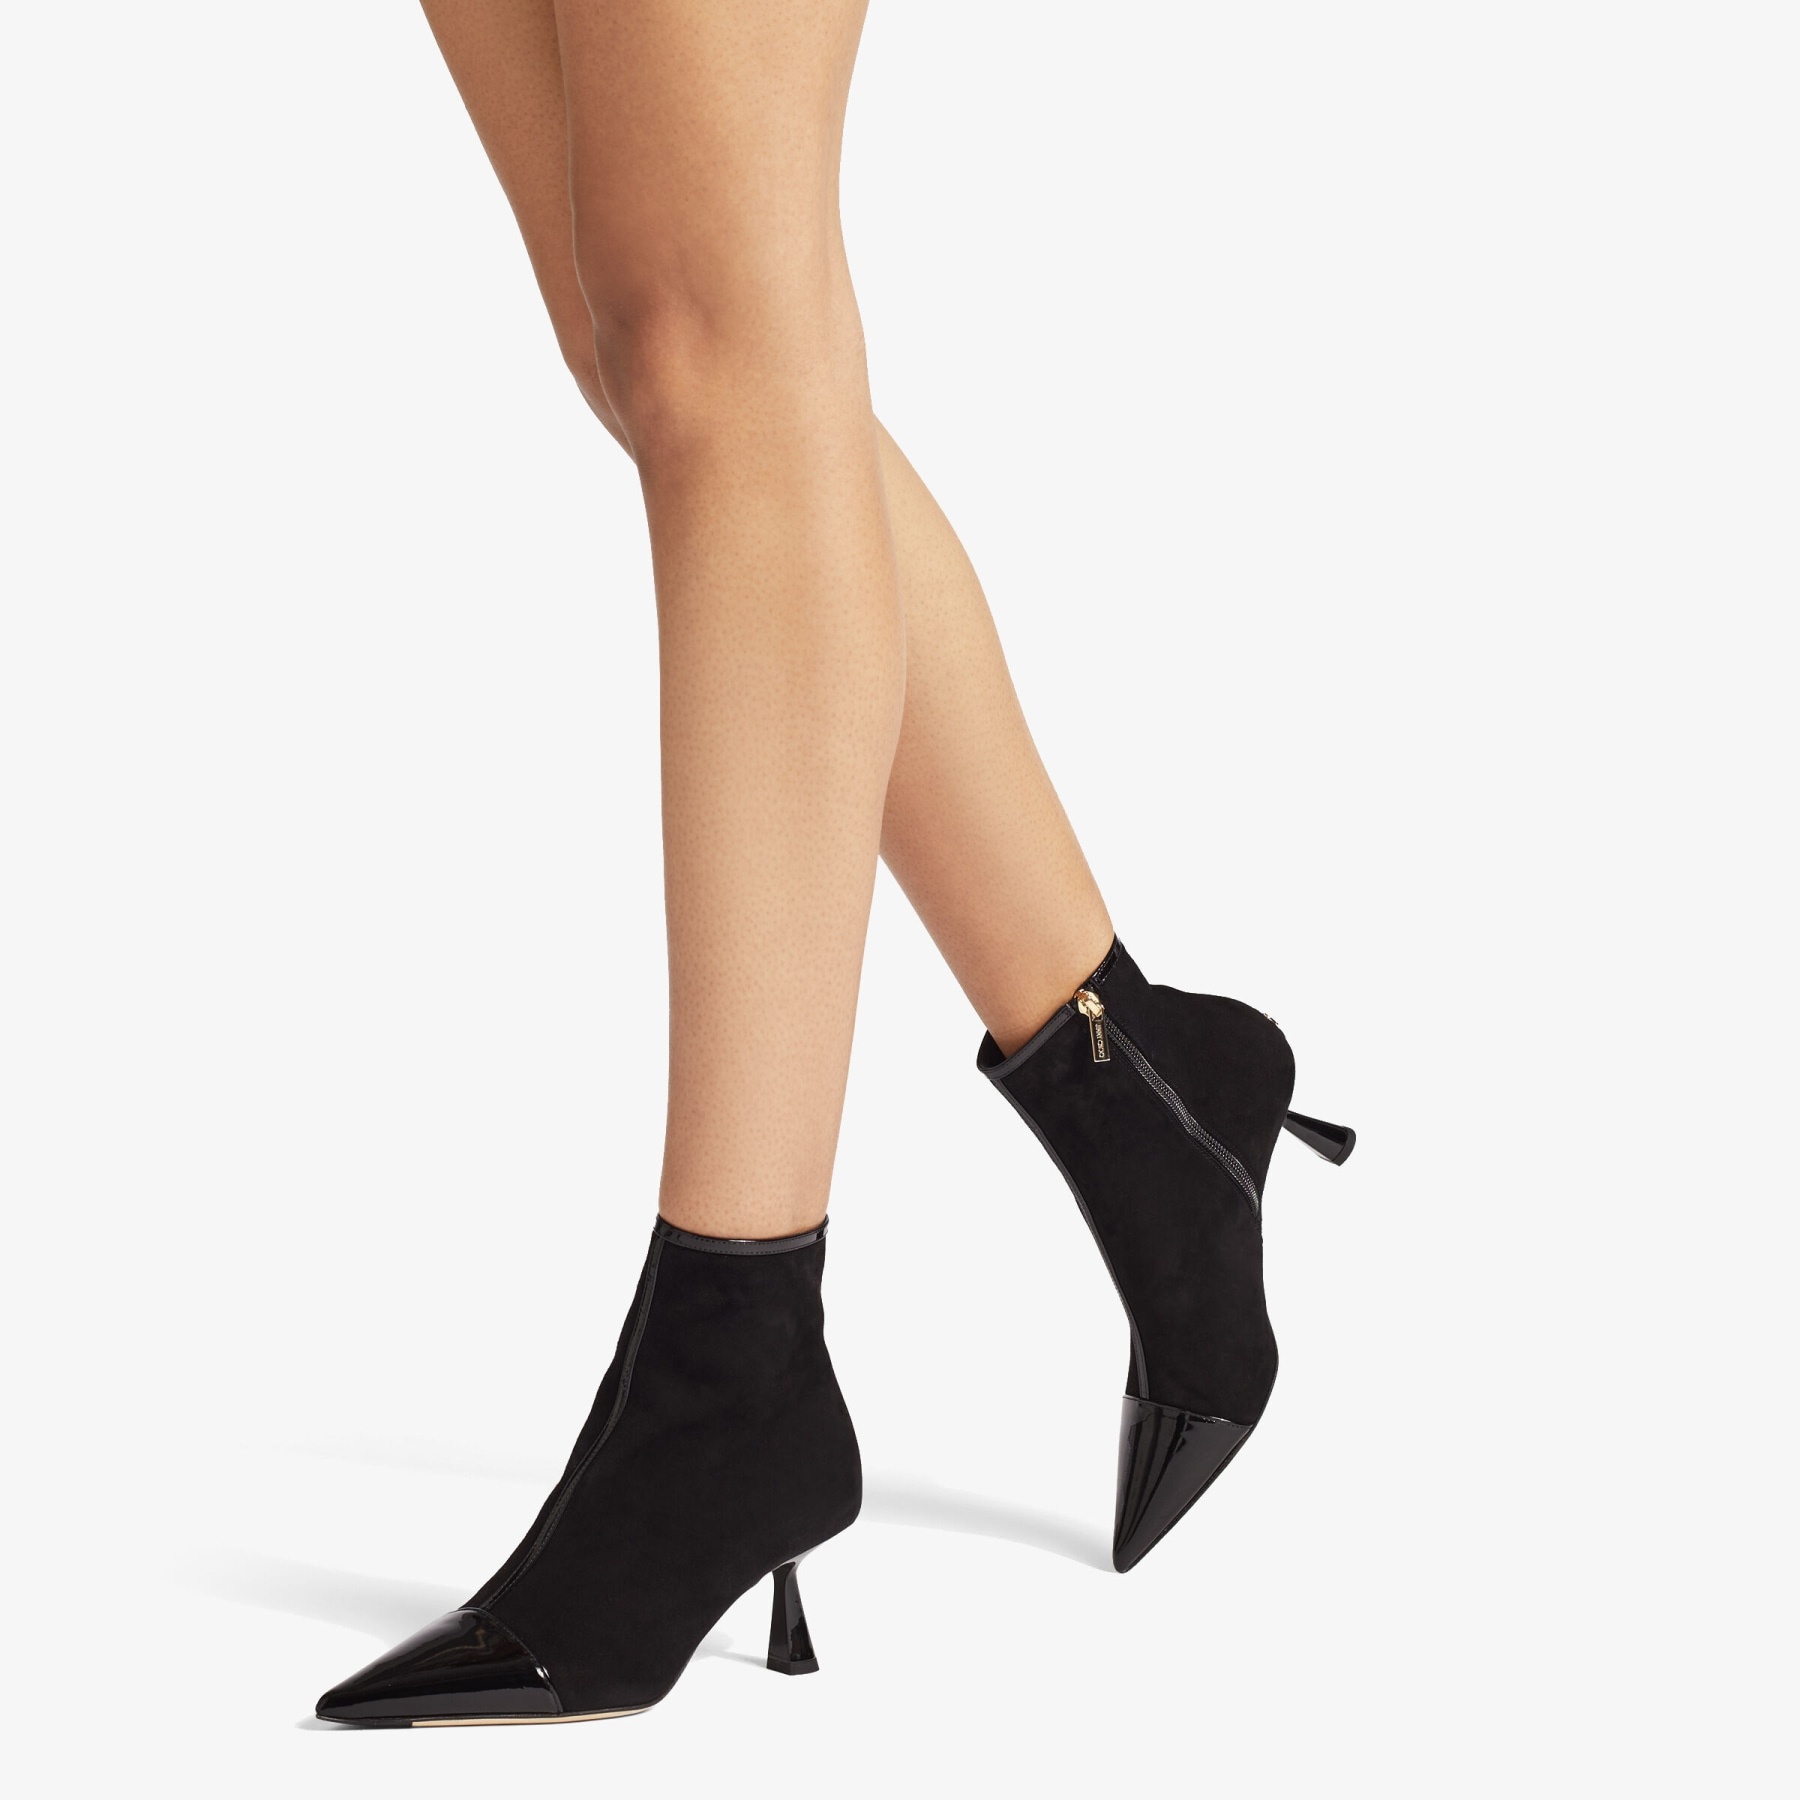 Kix/z 65
Black Patent and Suede Ankle Boots - 2